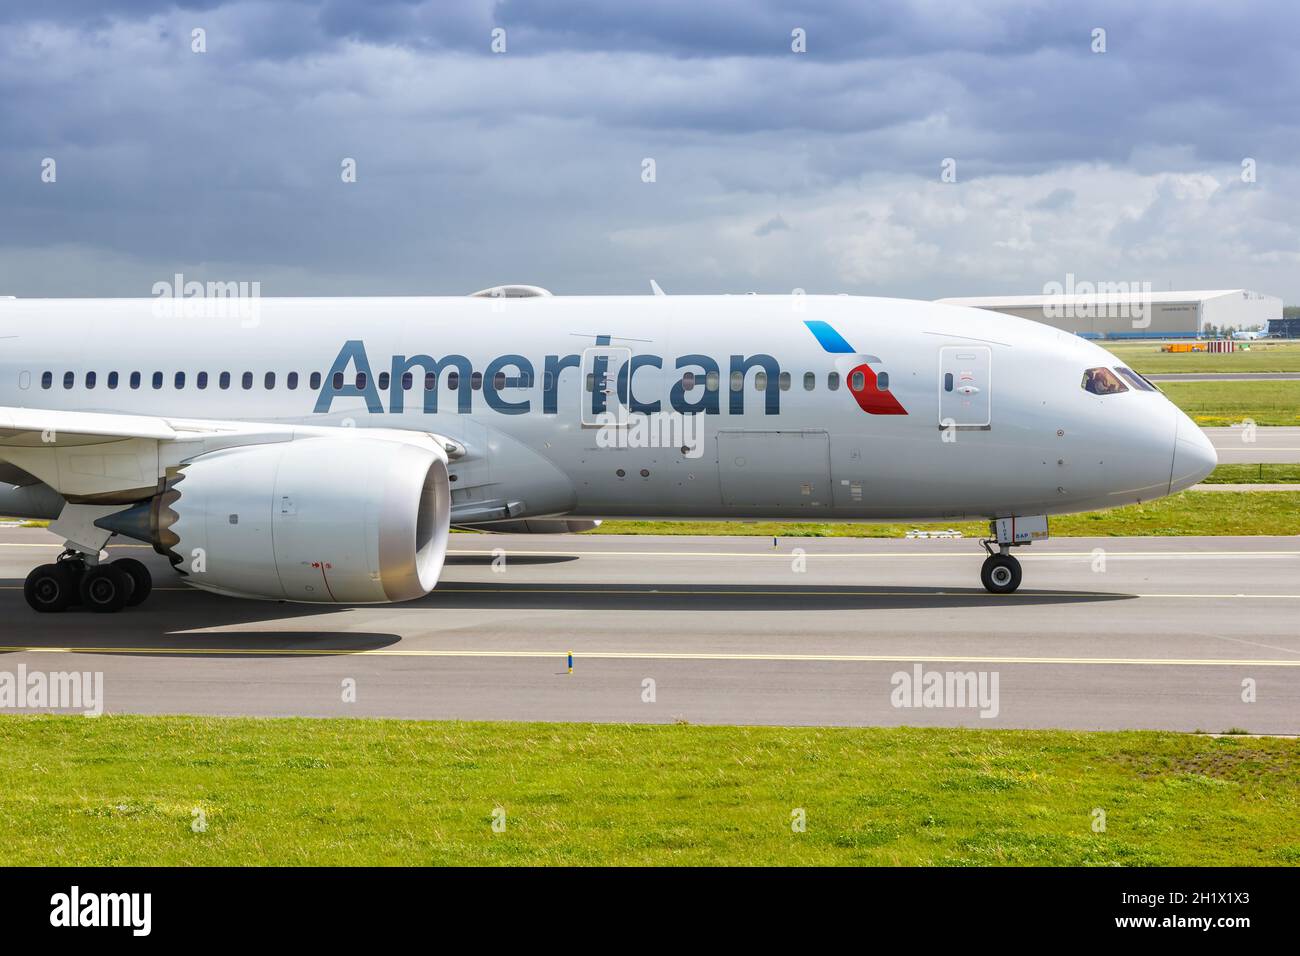 Amsterdam, Netherlands - May 21, 2021: American Airlines Boeing 787-8 Dreamliner airplane at Amsterdam Schiphol airport (AMS) in the Netherlands. Stock Photo